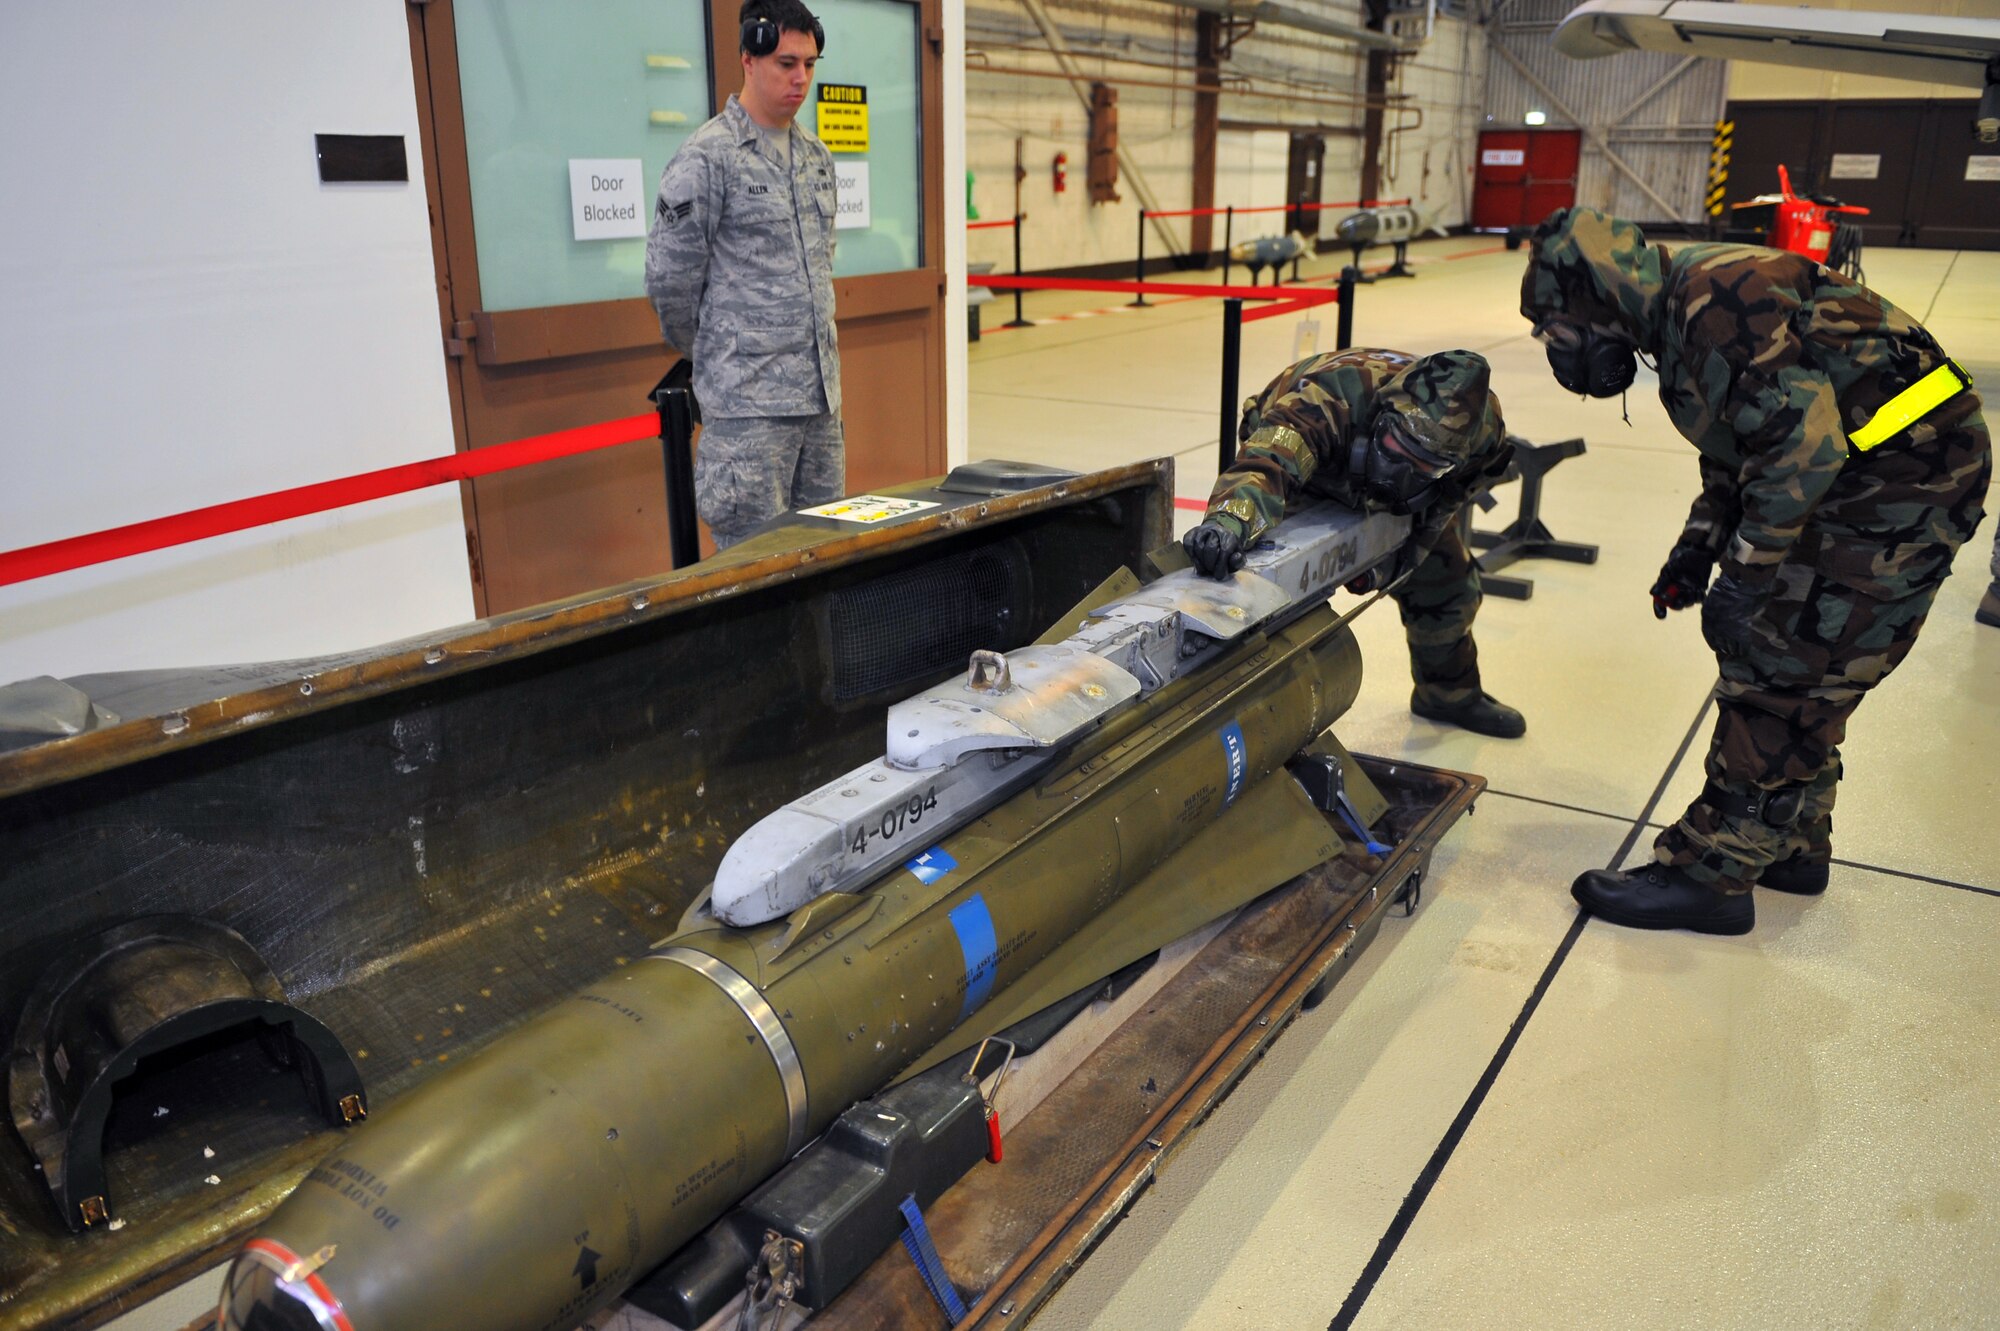 SPANGDAHLEM AIR BASE, Germany – Airmen assigned to the 52nd Aircraft Maintenance Squadron slide a LAU-117 launcher onto an AGM-65 missile before loading the complete assembly on an A-10 Thuderbolt II during a munitions-loading evaluation here Nov. 29. The evaluation ensures load-crew members and team chiefs retain their qualification to load all munitions and are ready for mission taskings. Crew members complete an evaluation every month and are required to be evaluated annually while wearing chemical-warfare gear. (U.S. Air Force photo/Airman 1st Class Dillon Davis)